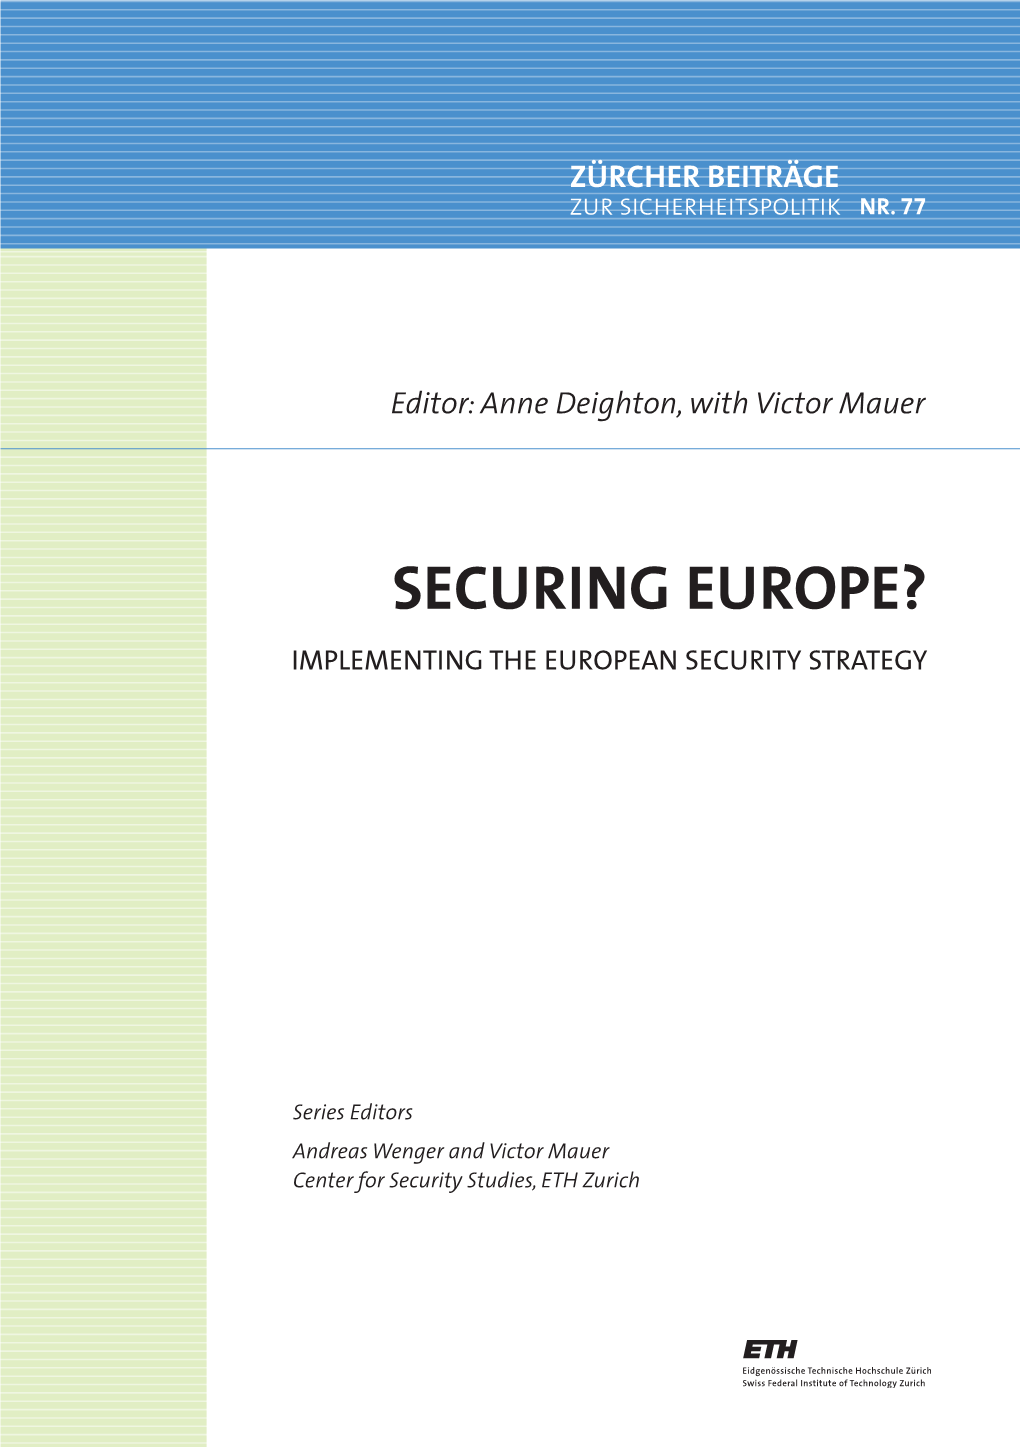 Securing Europe? Implementing the European Security Strategy